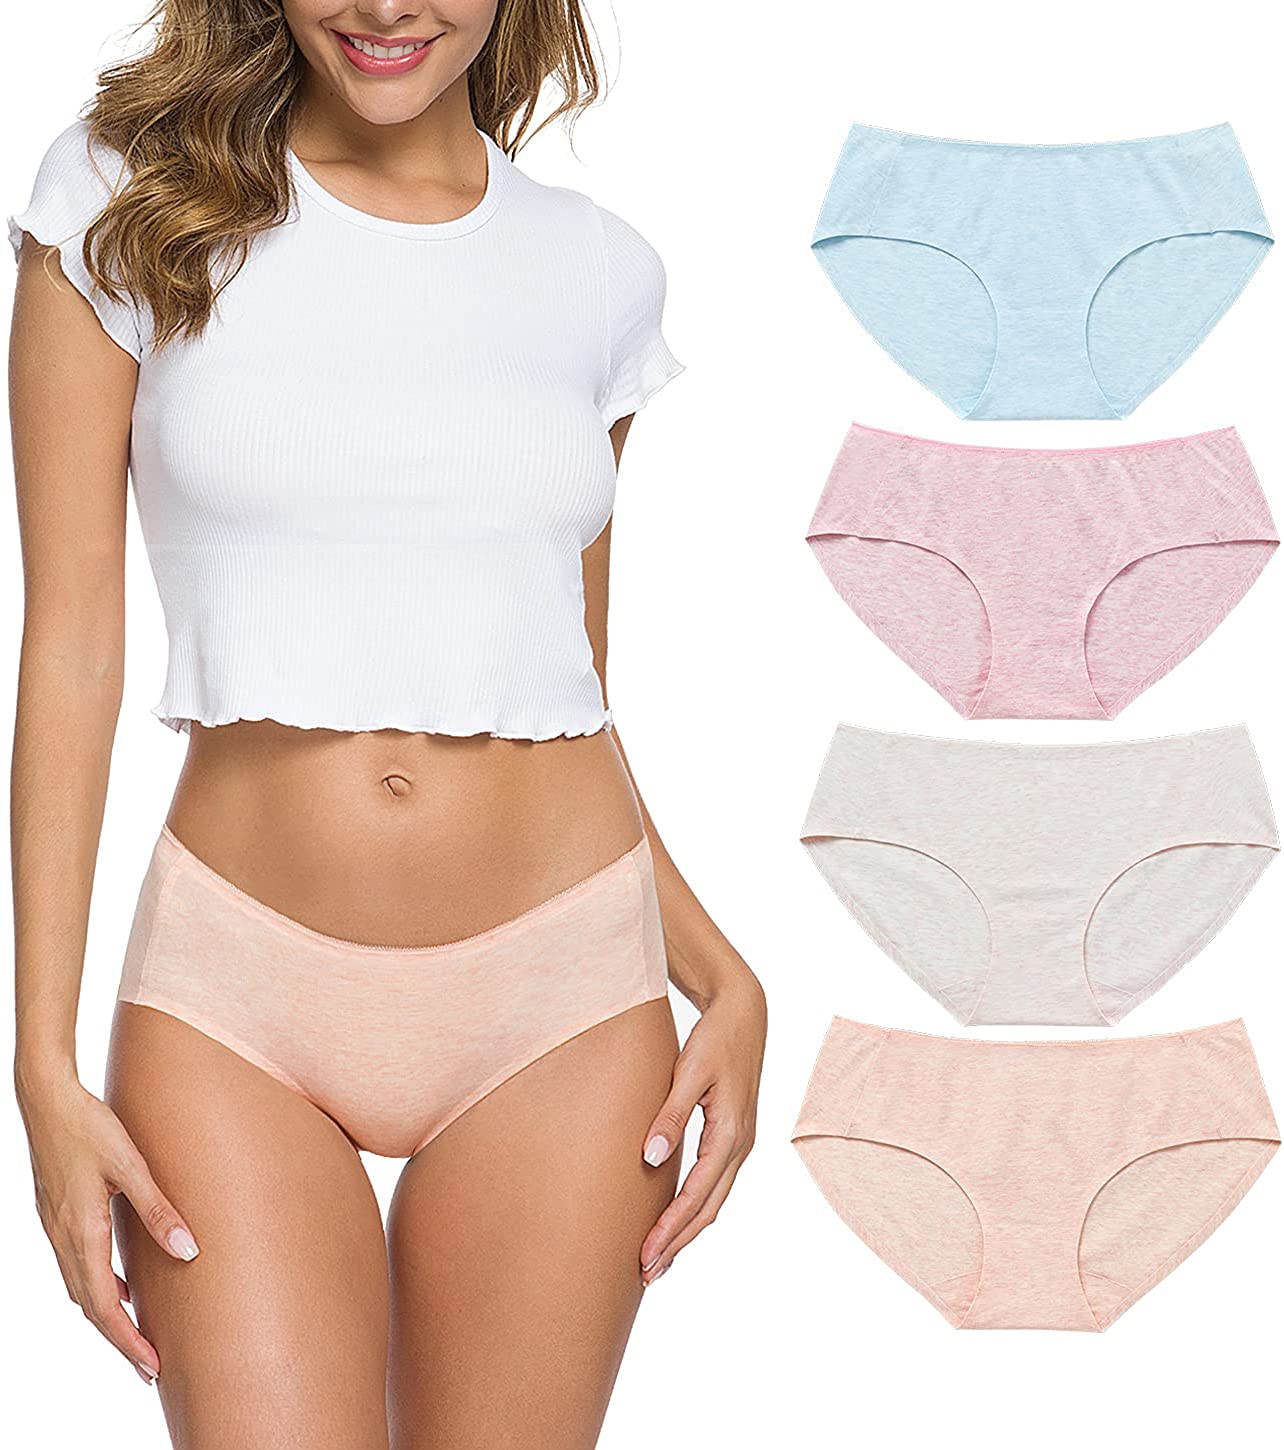 Wealurre Ladies Knickers Low Rise Cotton Briefs Womens Seamless